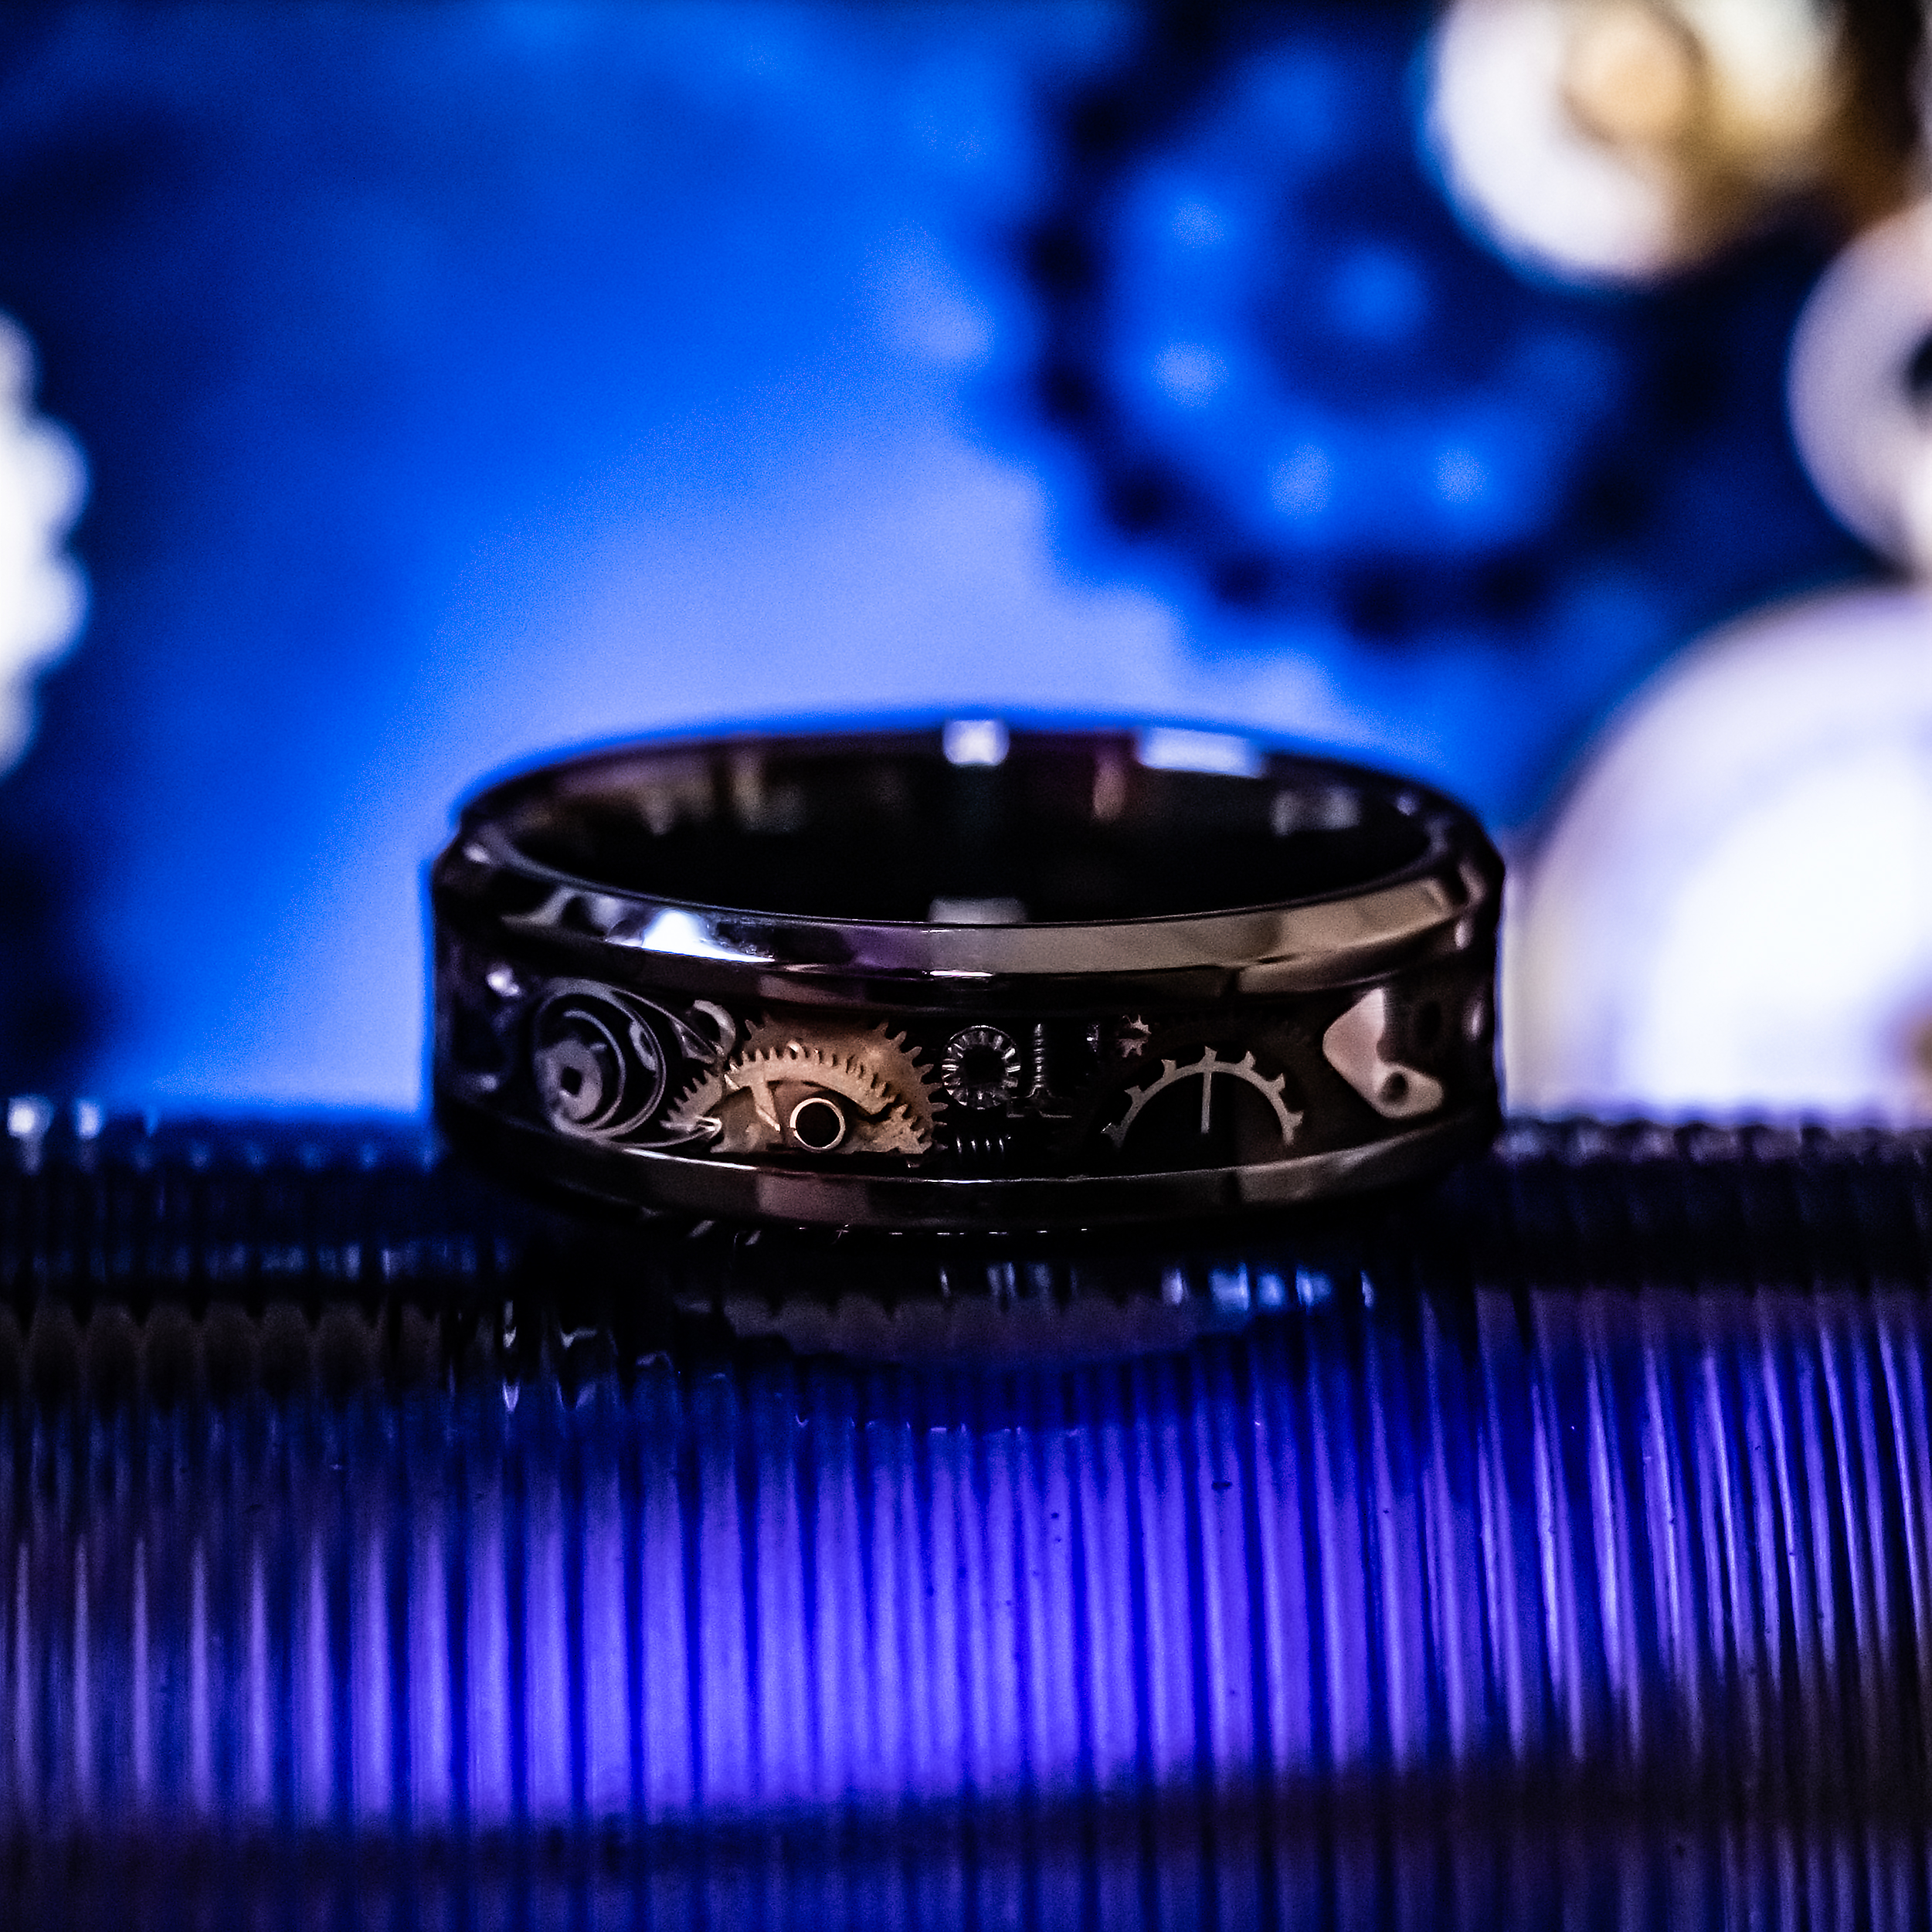 steampunk themed ceramic Ring made of watch parts with blue background